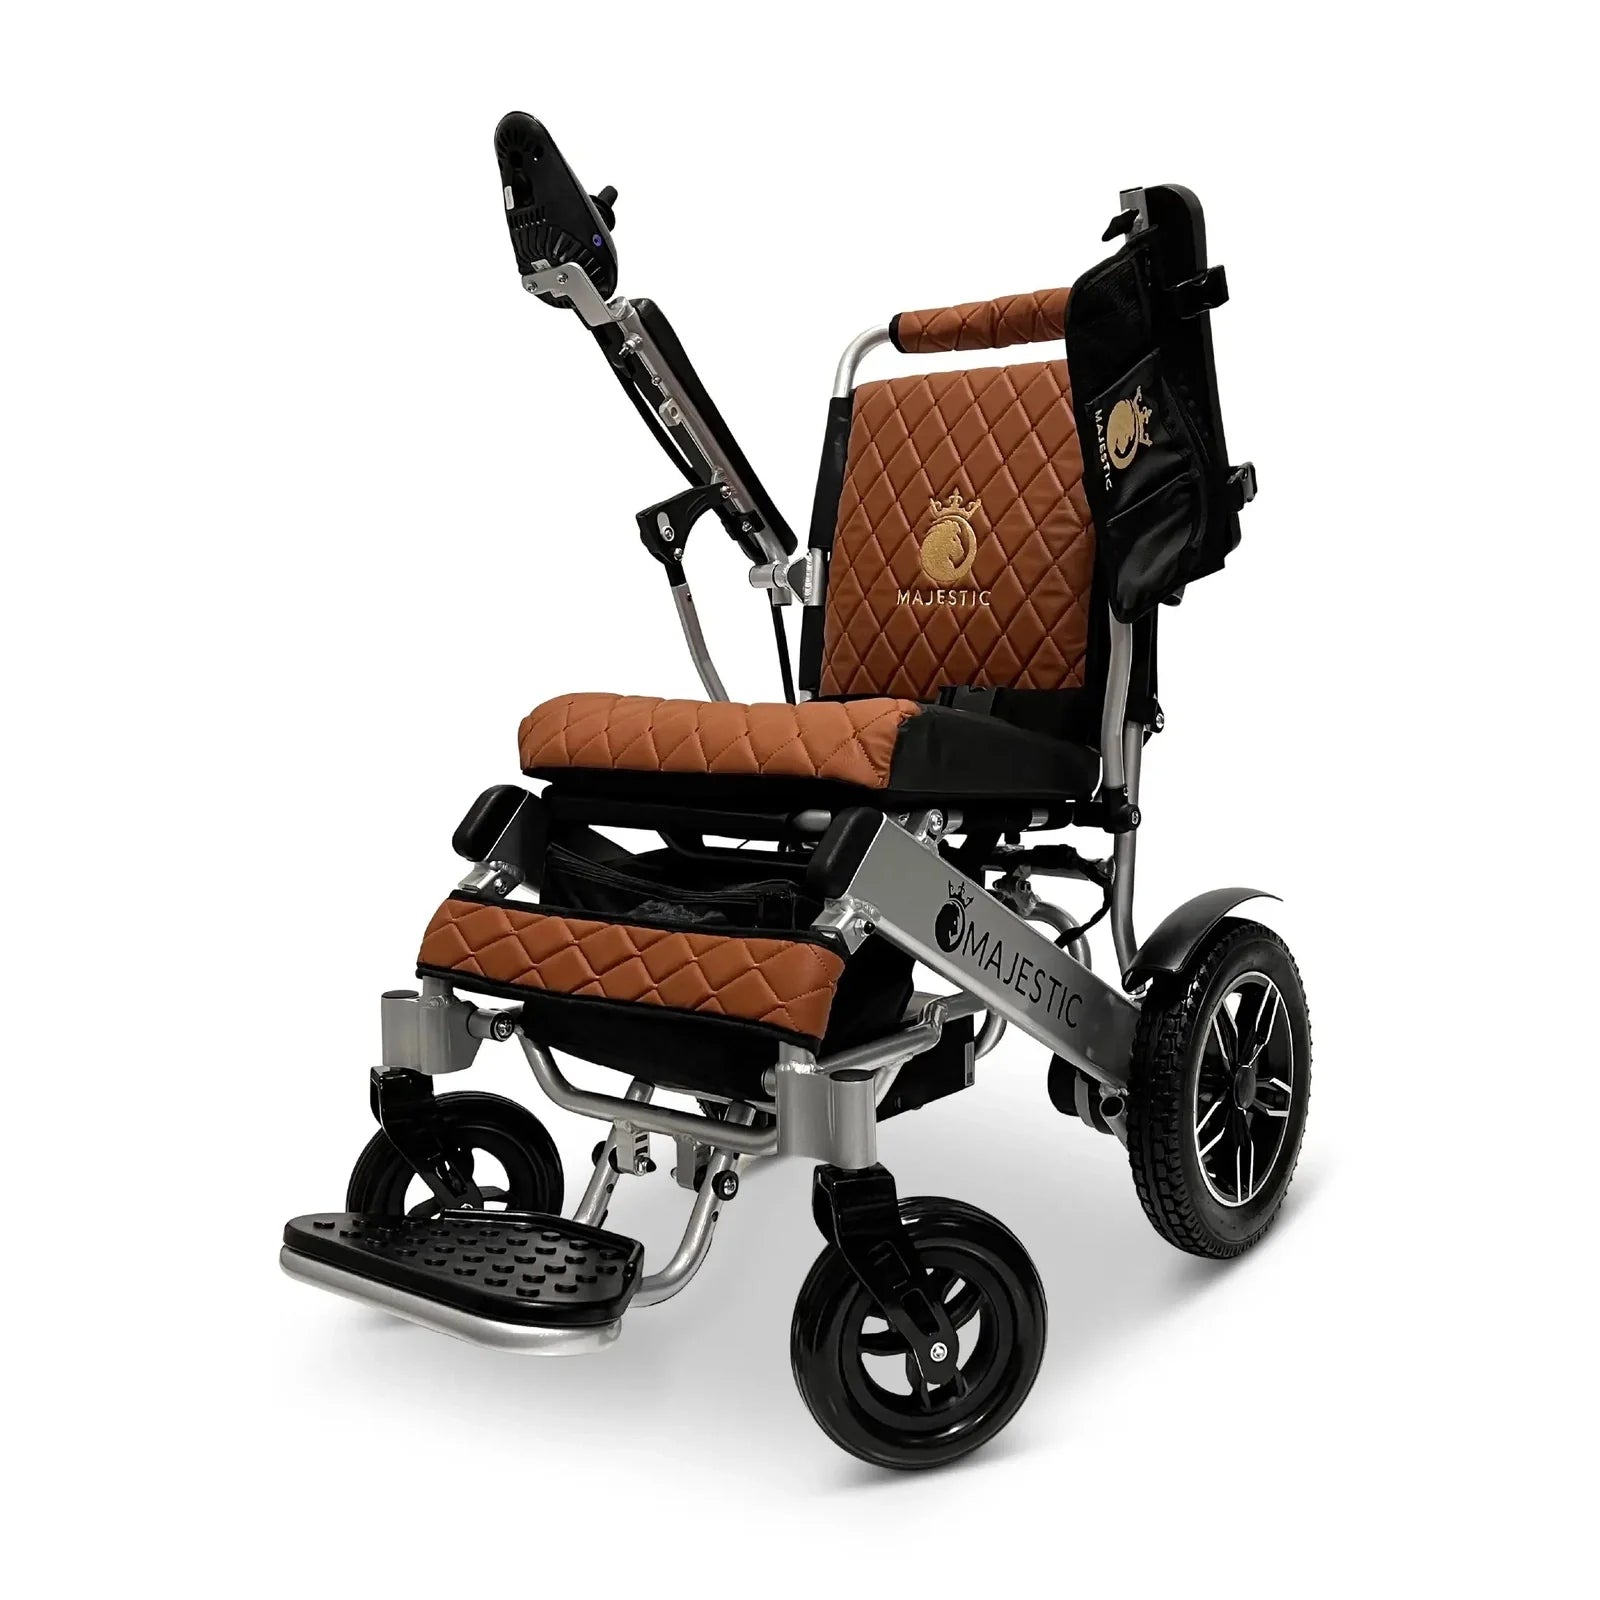 ComfyGO Majestic IQ-8000 Remote Controlled Lightweight Folding Electric Wheelchair Power Wheelchairs ComfyGO Silver Taba 10 Miles & 17.5" Seat Width